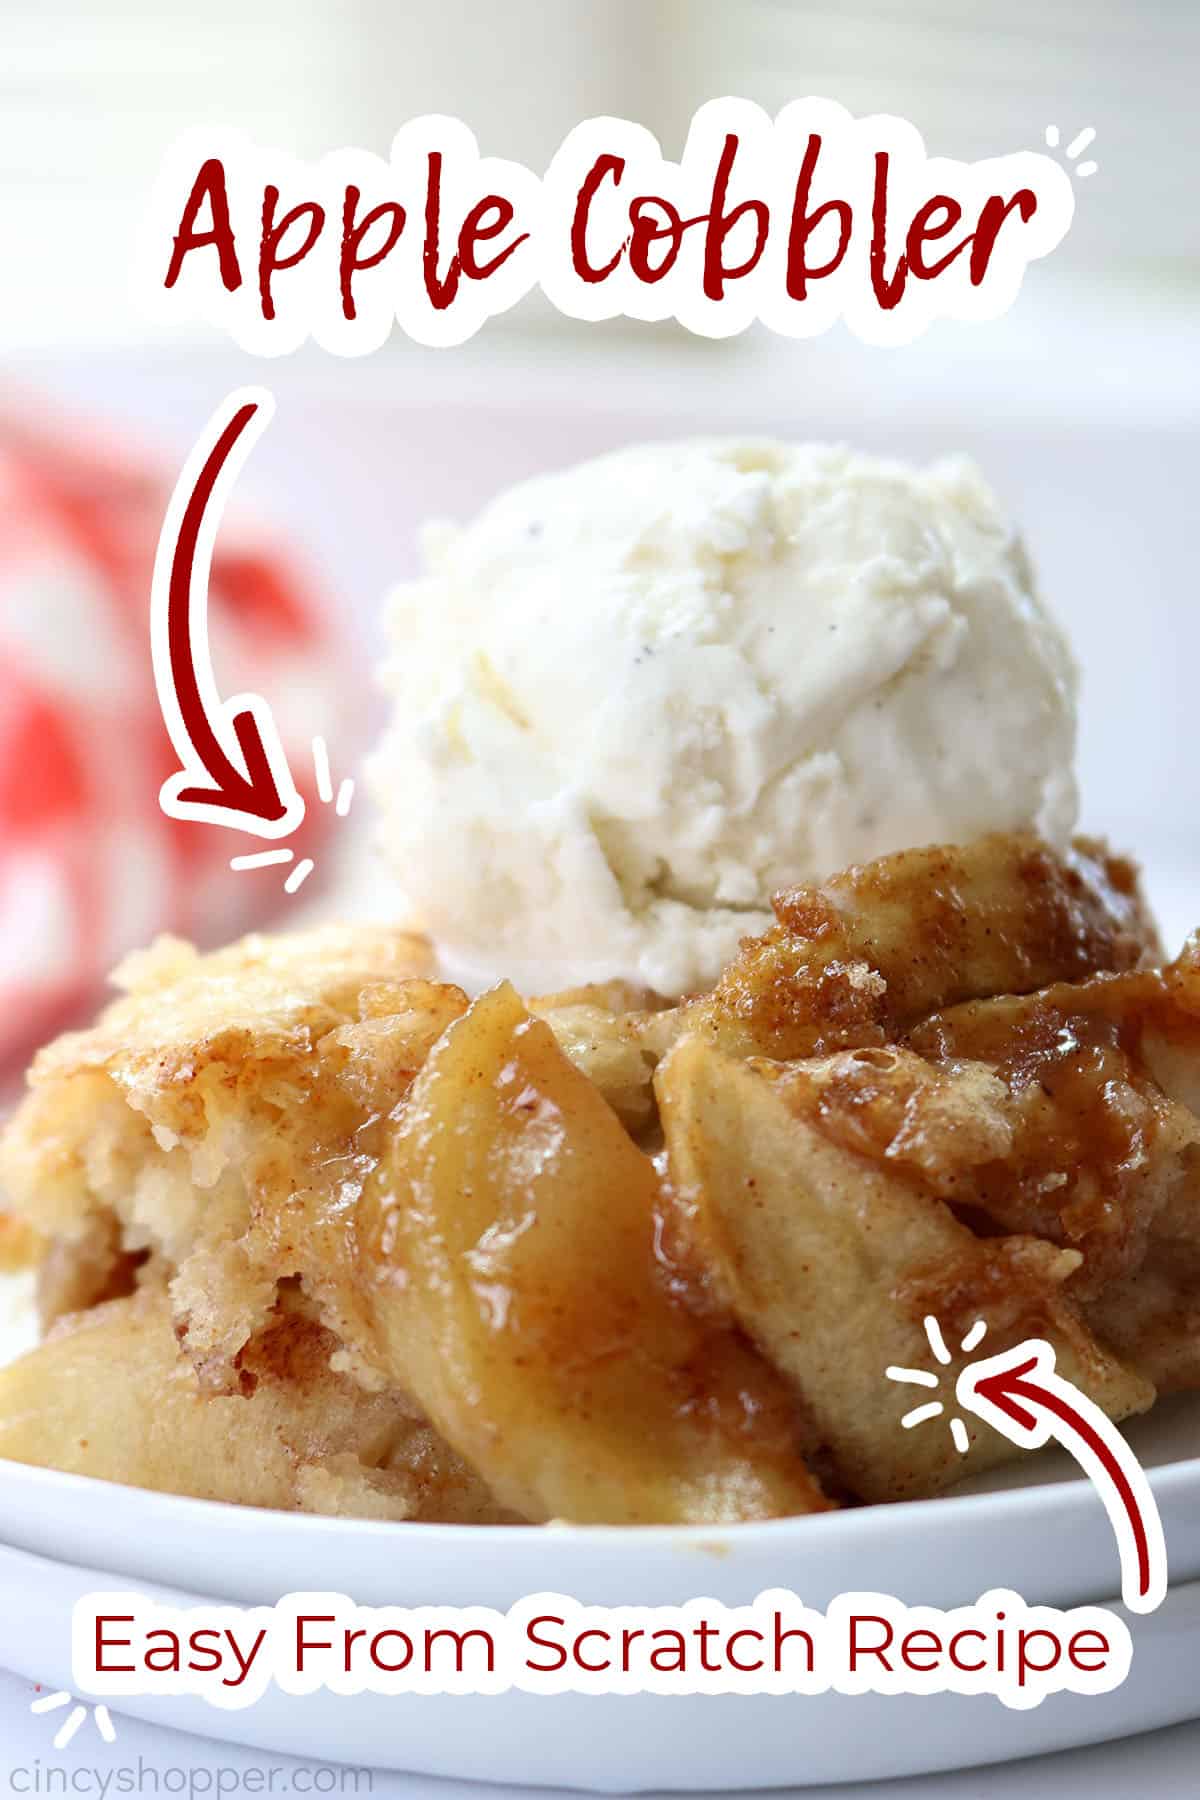 Text on image Apple Cobbler Easy from scratch recipe.